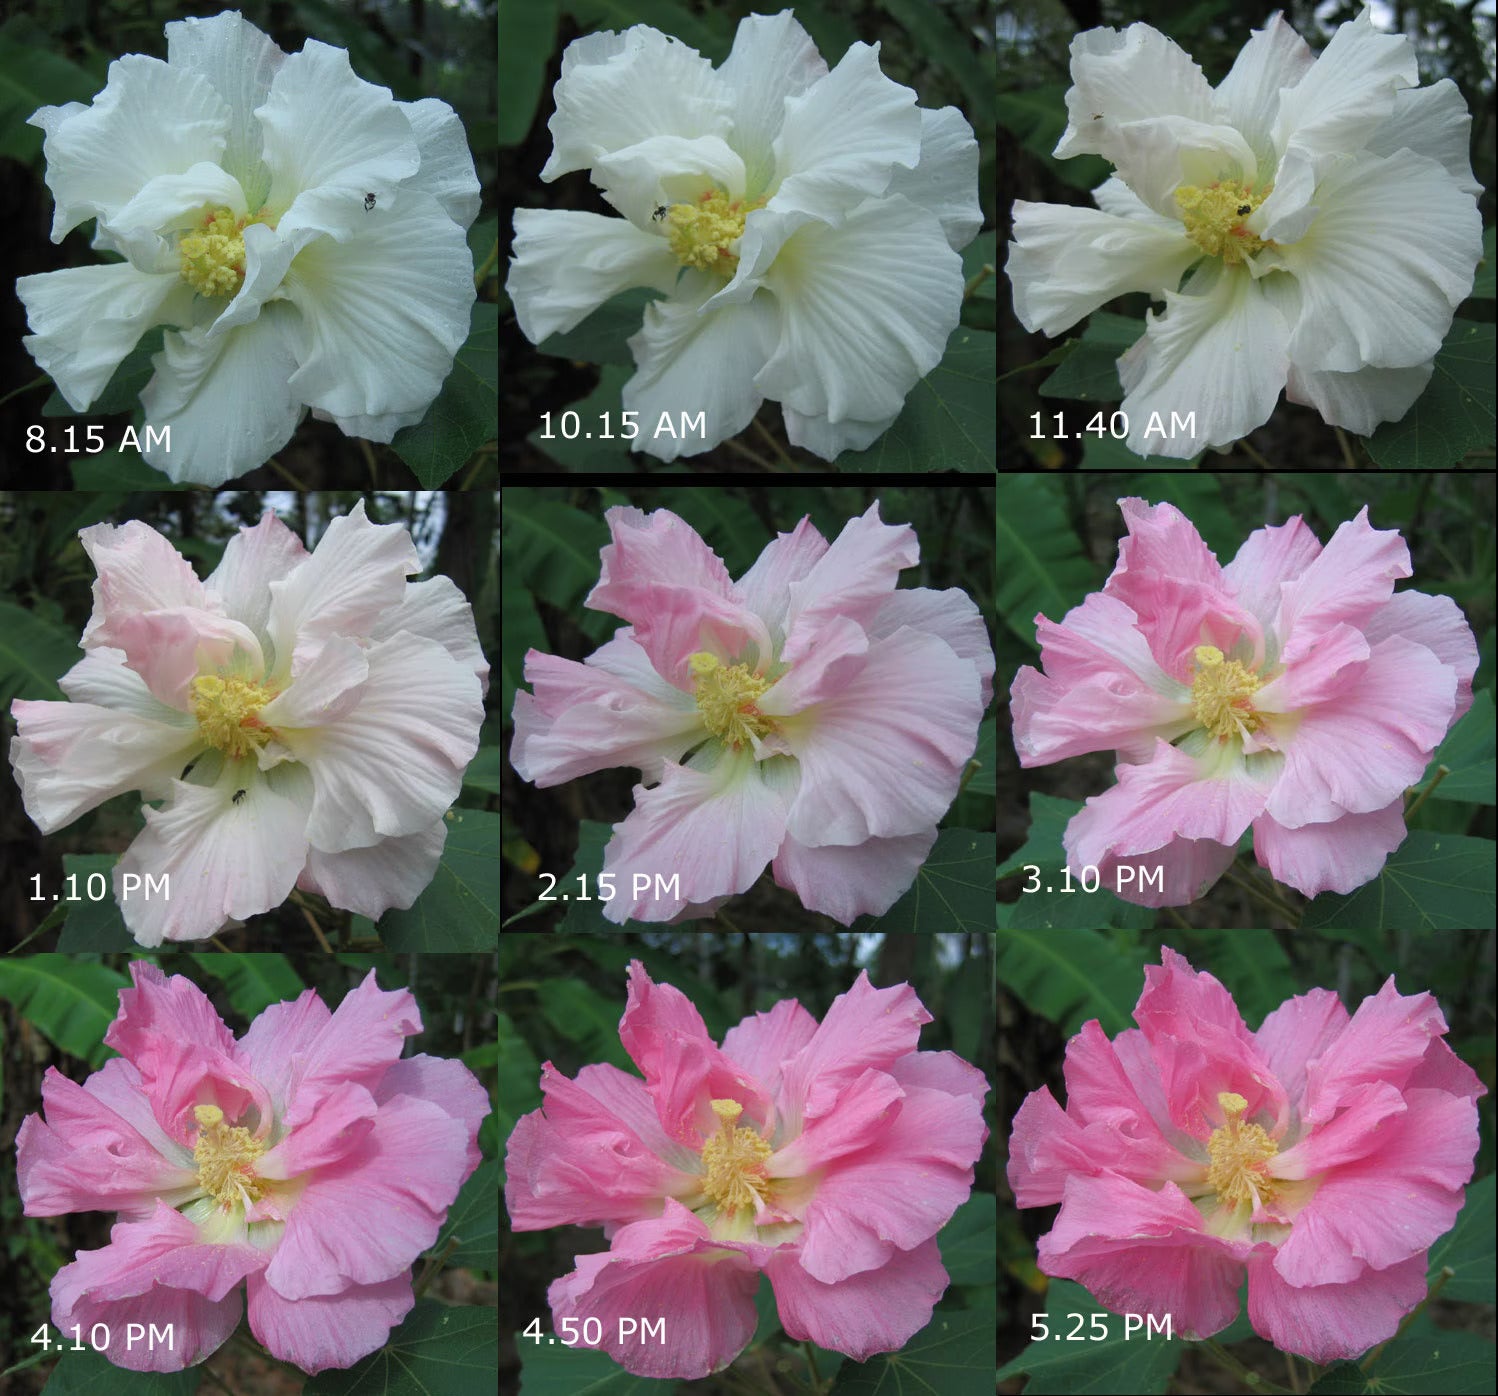 Colour Changing Rose (Hibiscus mutabilis) All Time Flowering Live Plant